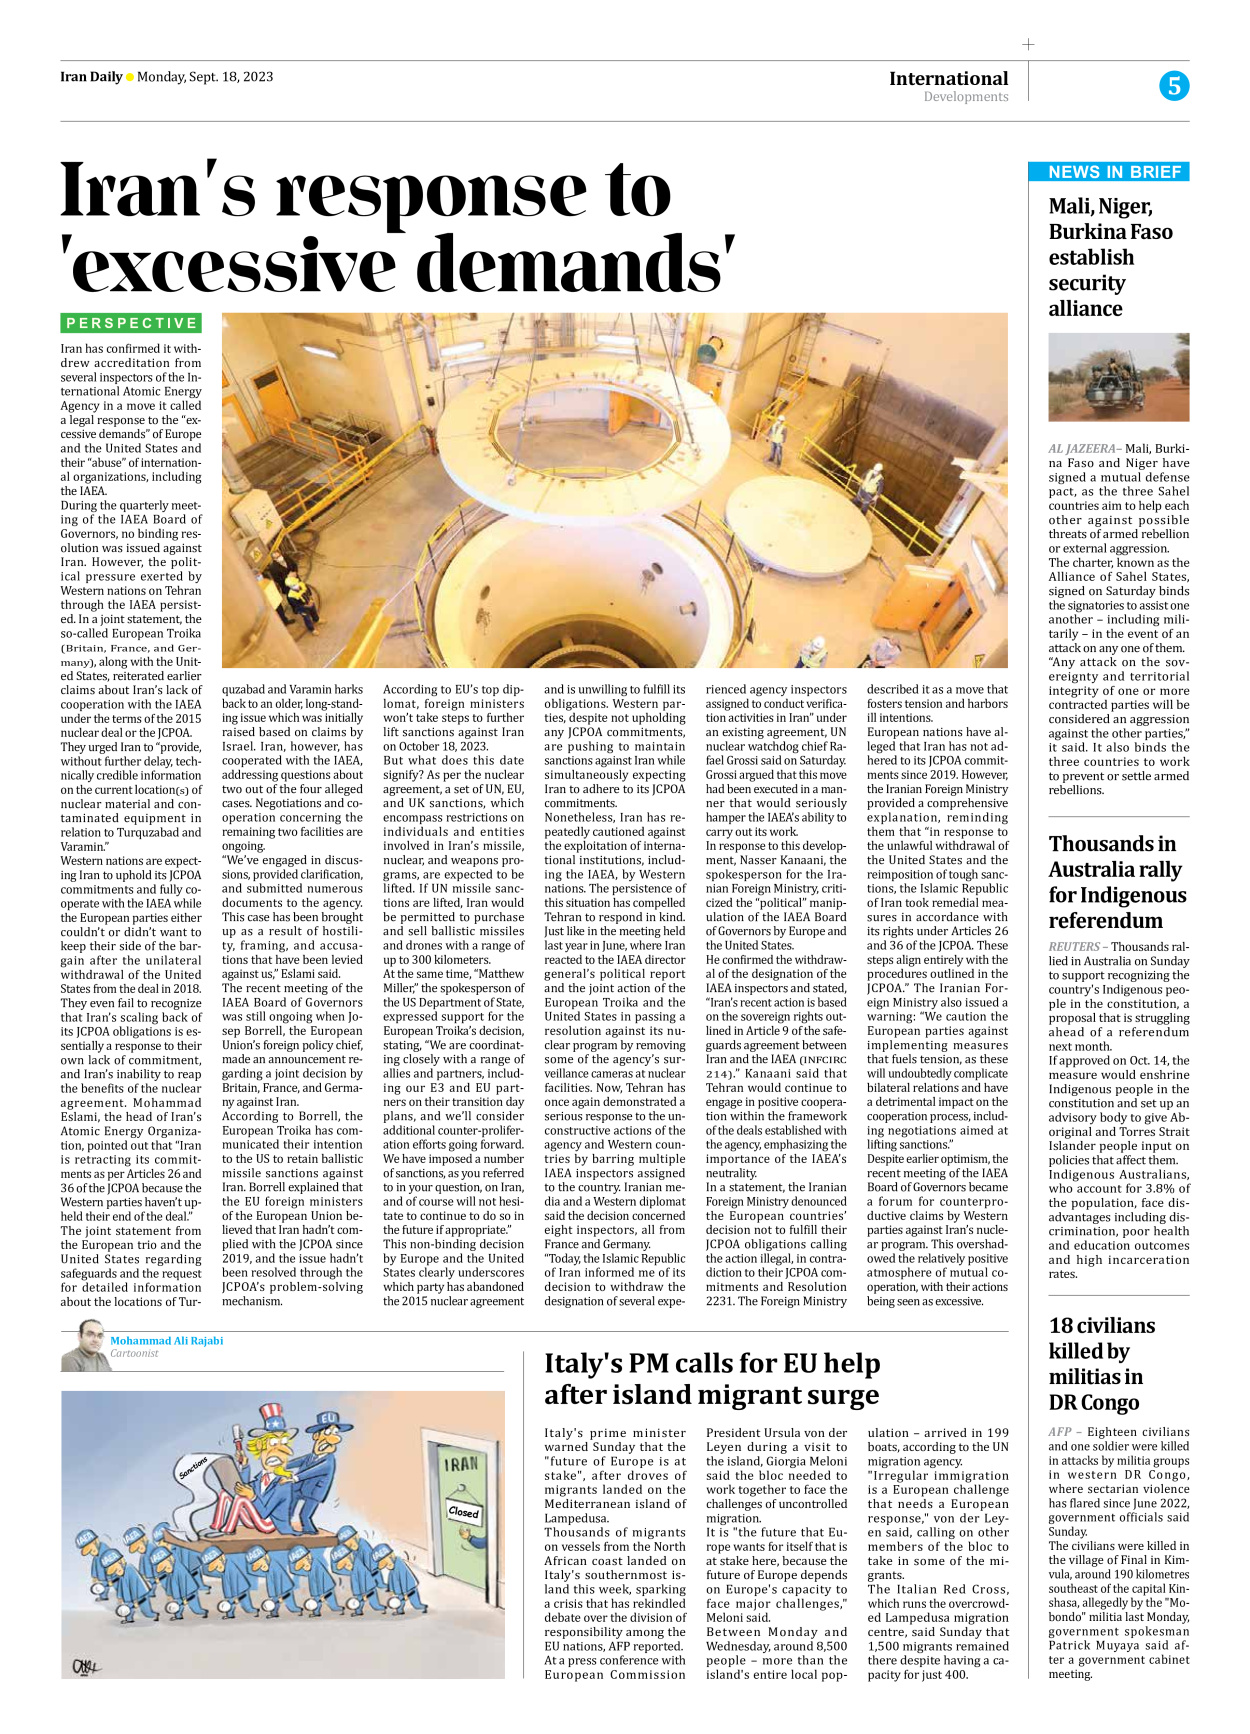 Iran Daily - Number Seven Thousand Three Hundred and Eighty Eight - 18 September 2023 - Page 5